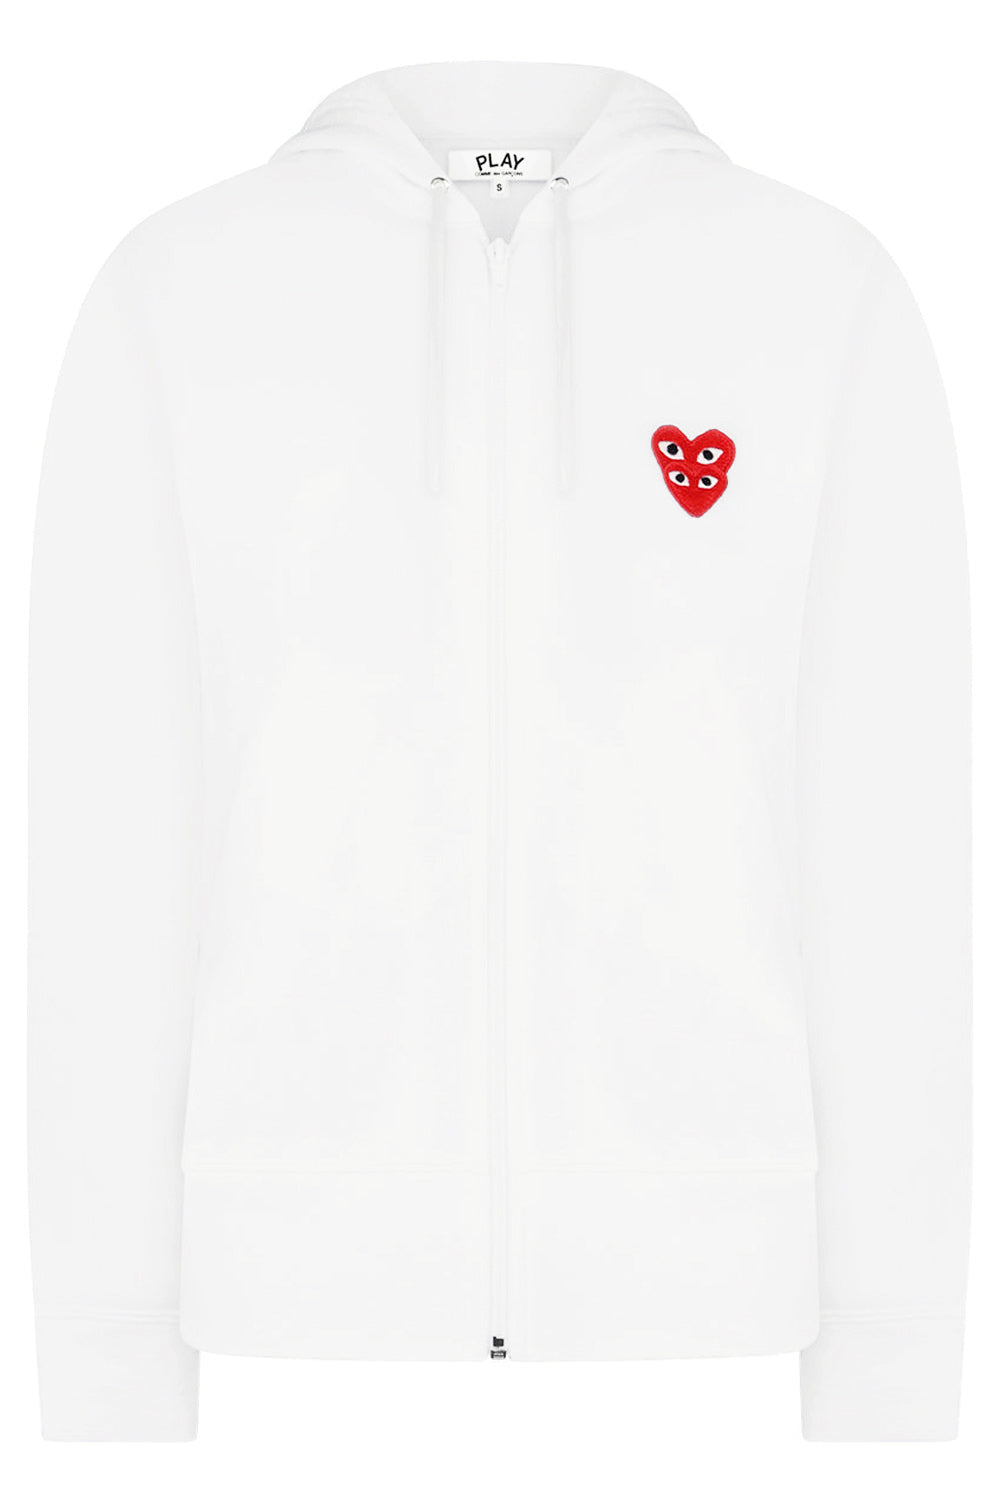 COMME DES GARCONS PLAY RTW PLAY MENS DOUBLE HEART ZIP HOODY | WHITE/RED HEARTS